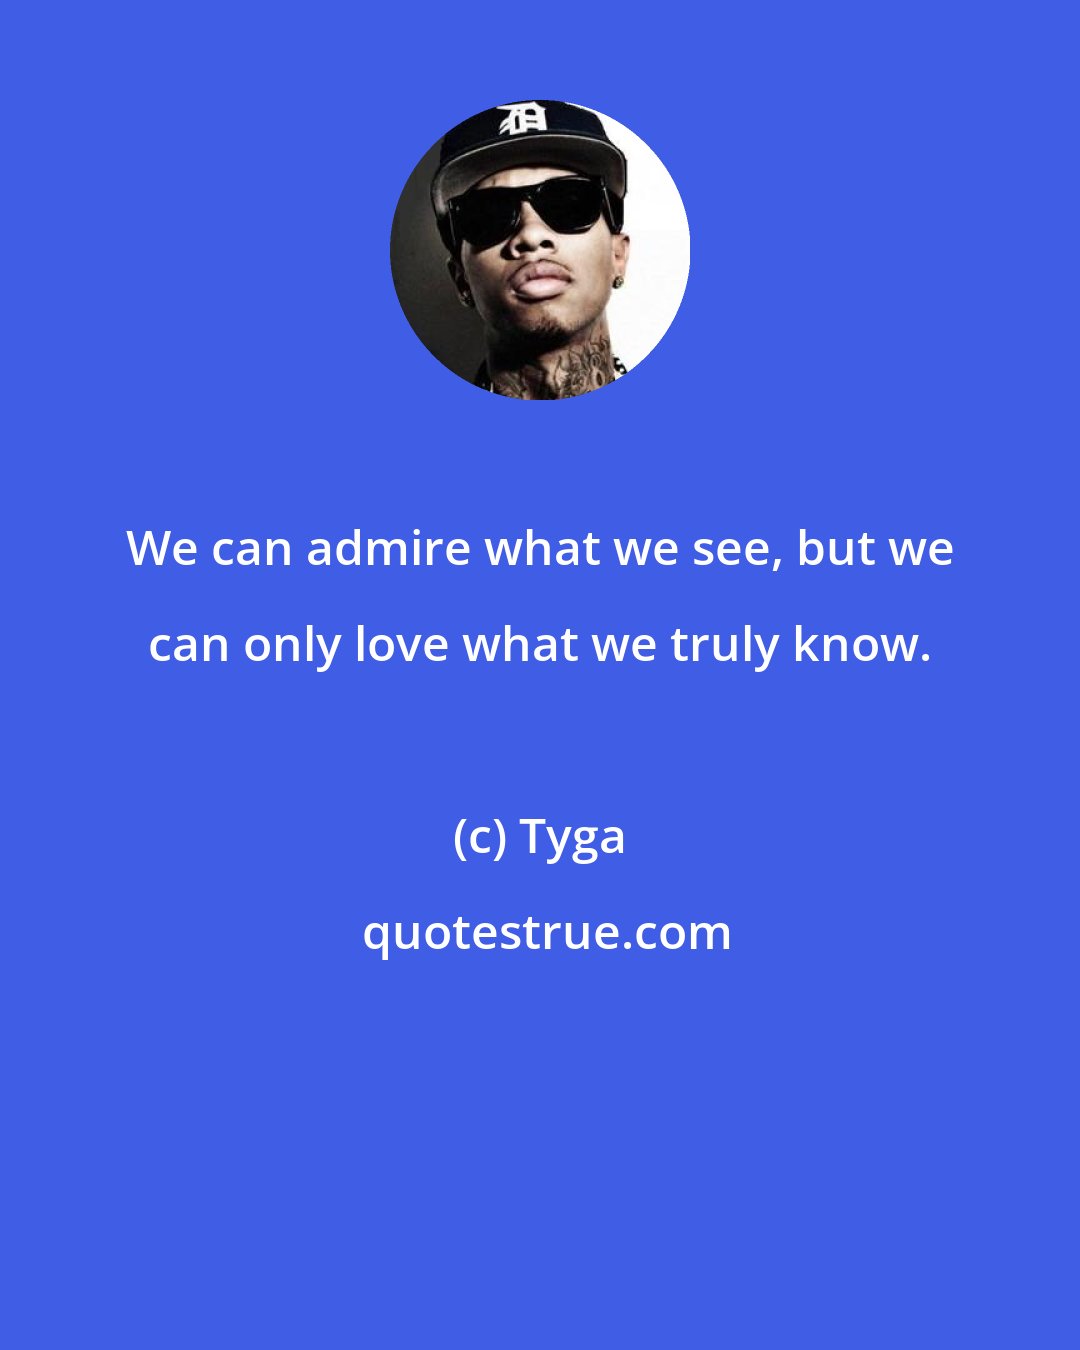 Tyga: We can admire what we see, but we can only love what we truly know.